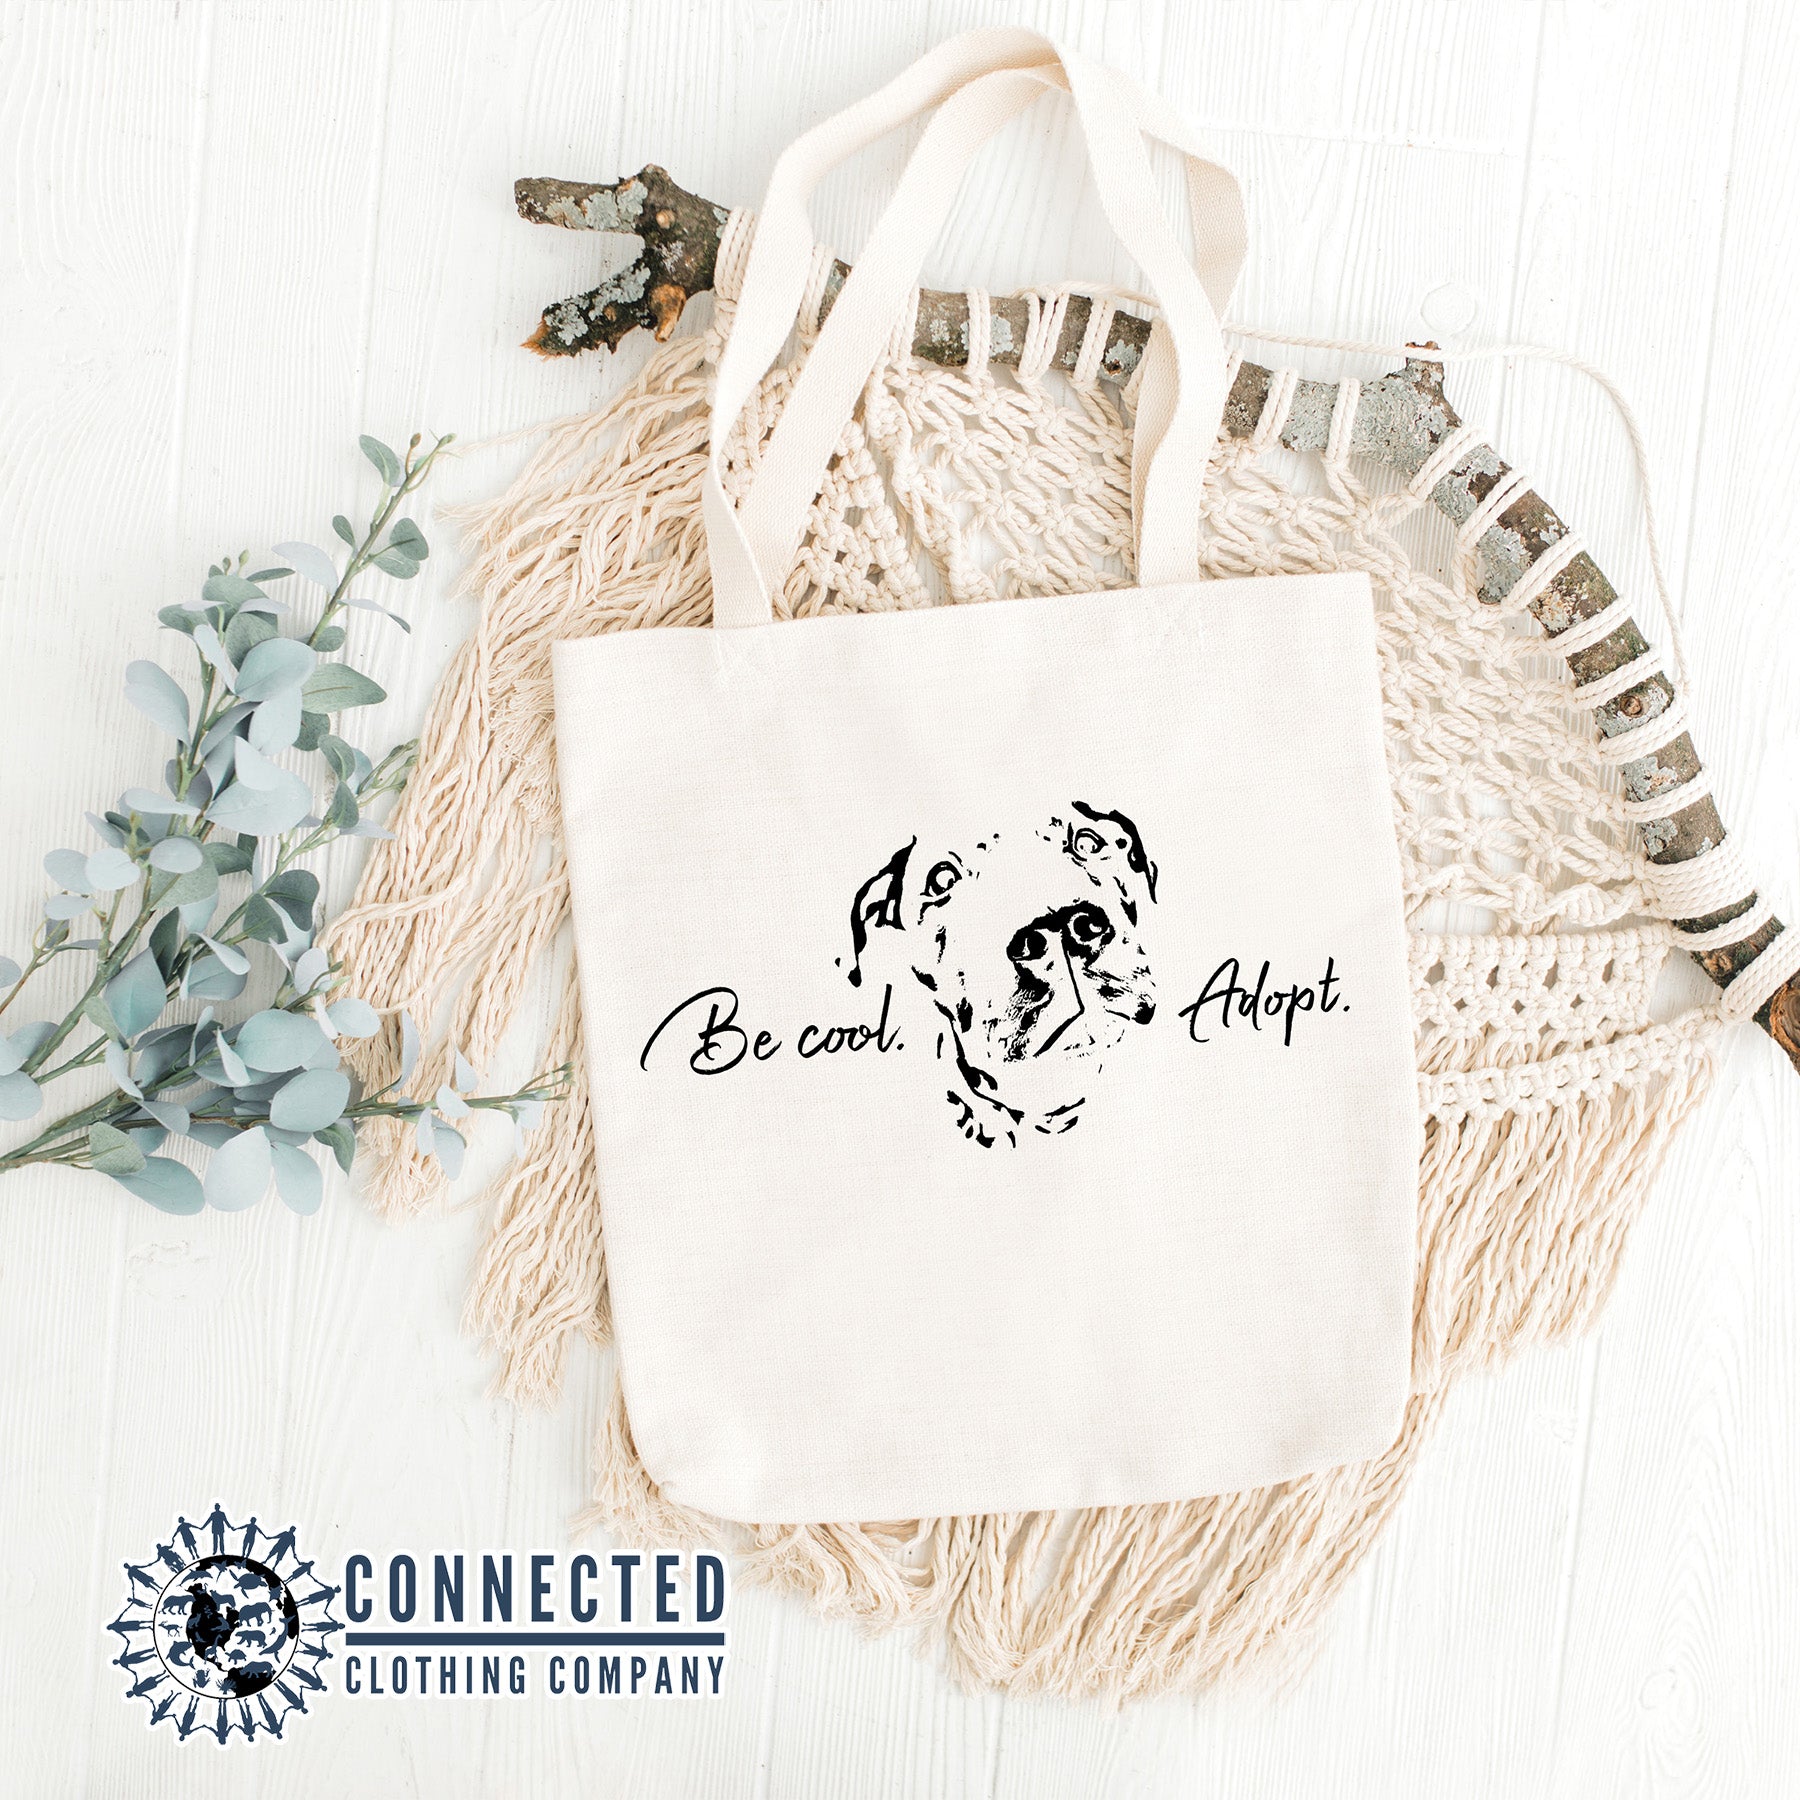 Be Cool Adopt Tote Bag - Connected Clothing Company - 10% of proceeds donated to animal rescue